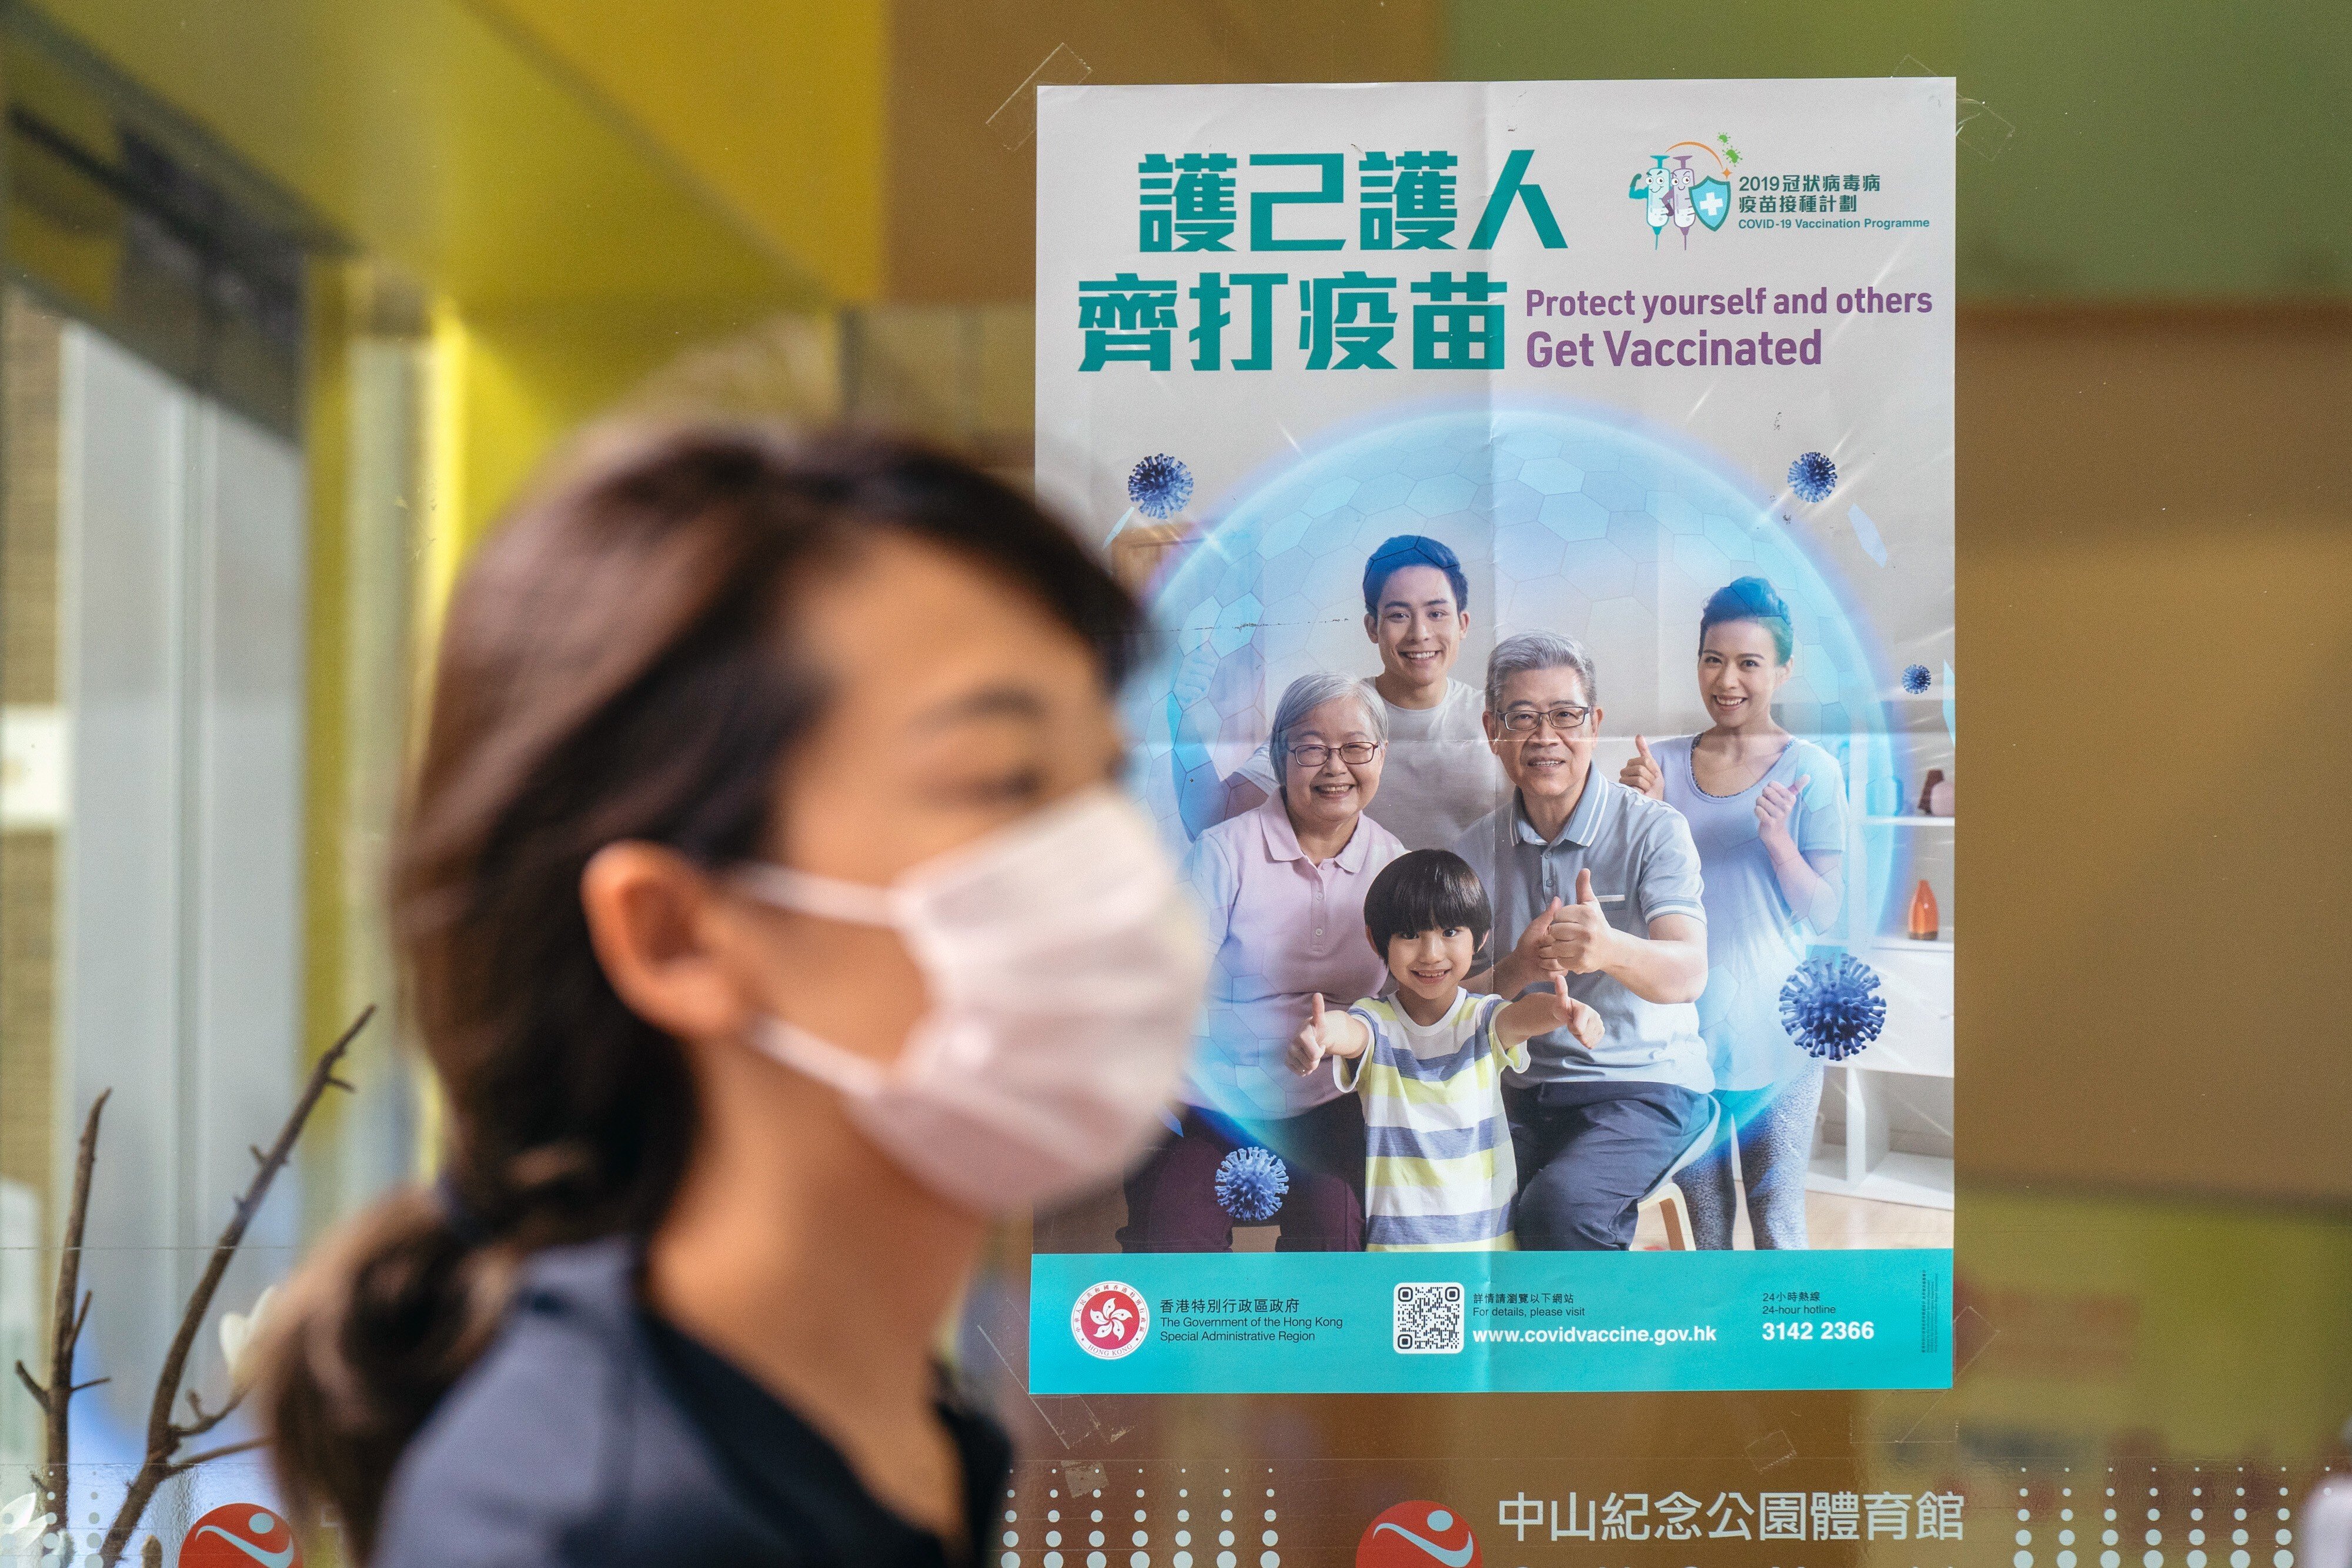 Hong Kong’s vaccination campaign has met with reluctance among the public. Photo: Bloomberg